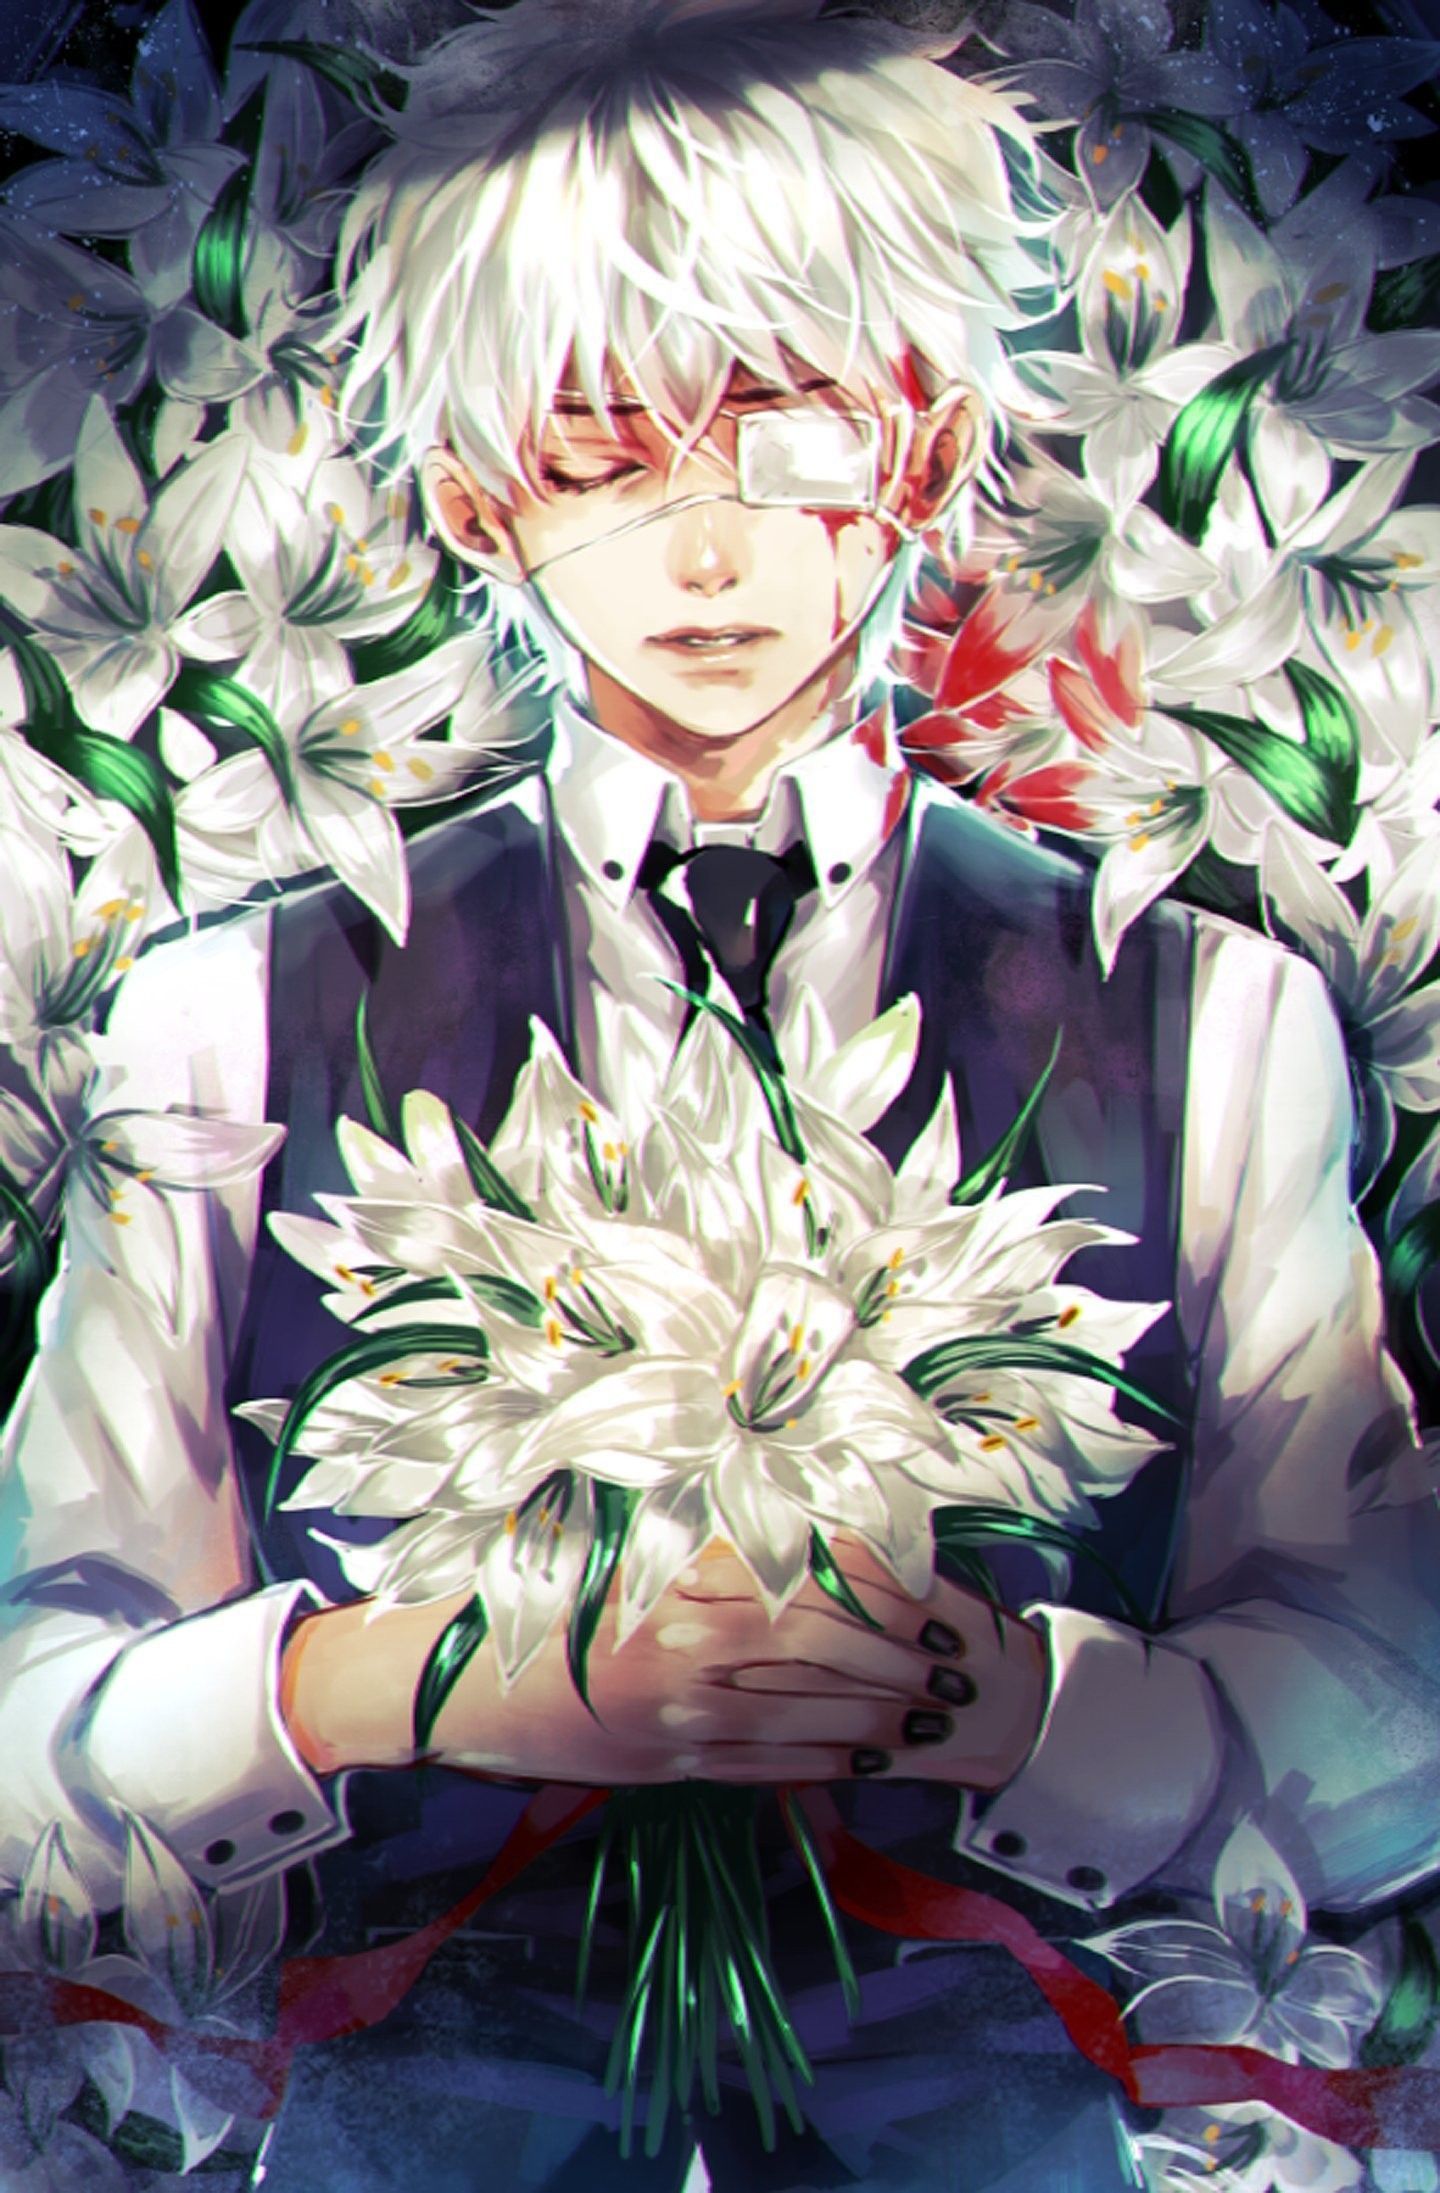 Anime Boy Holding Flowers Wallpapers - Wallpaper Cave